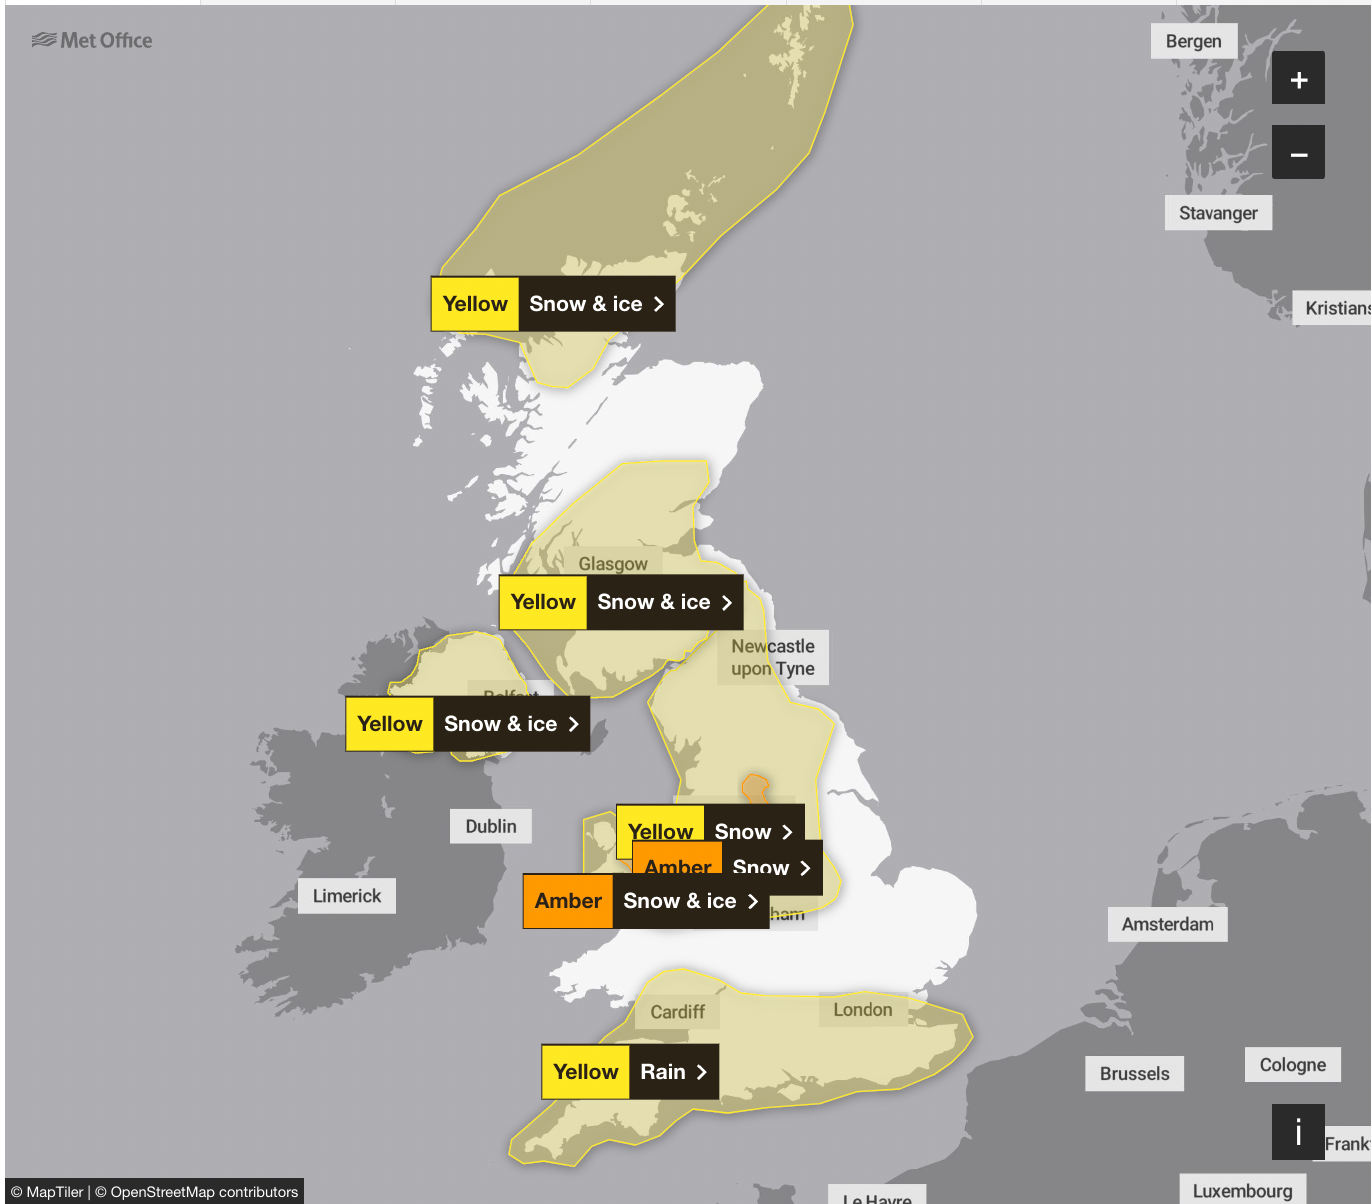 Two amber warnings for snow were issued on Thursday